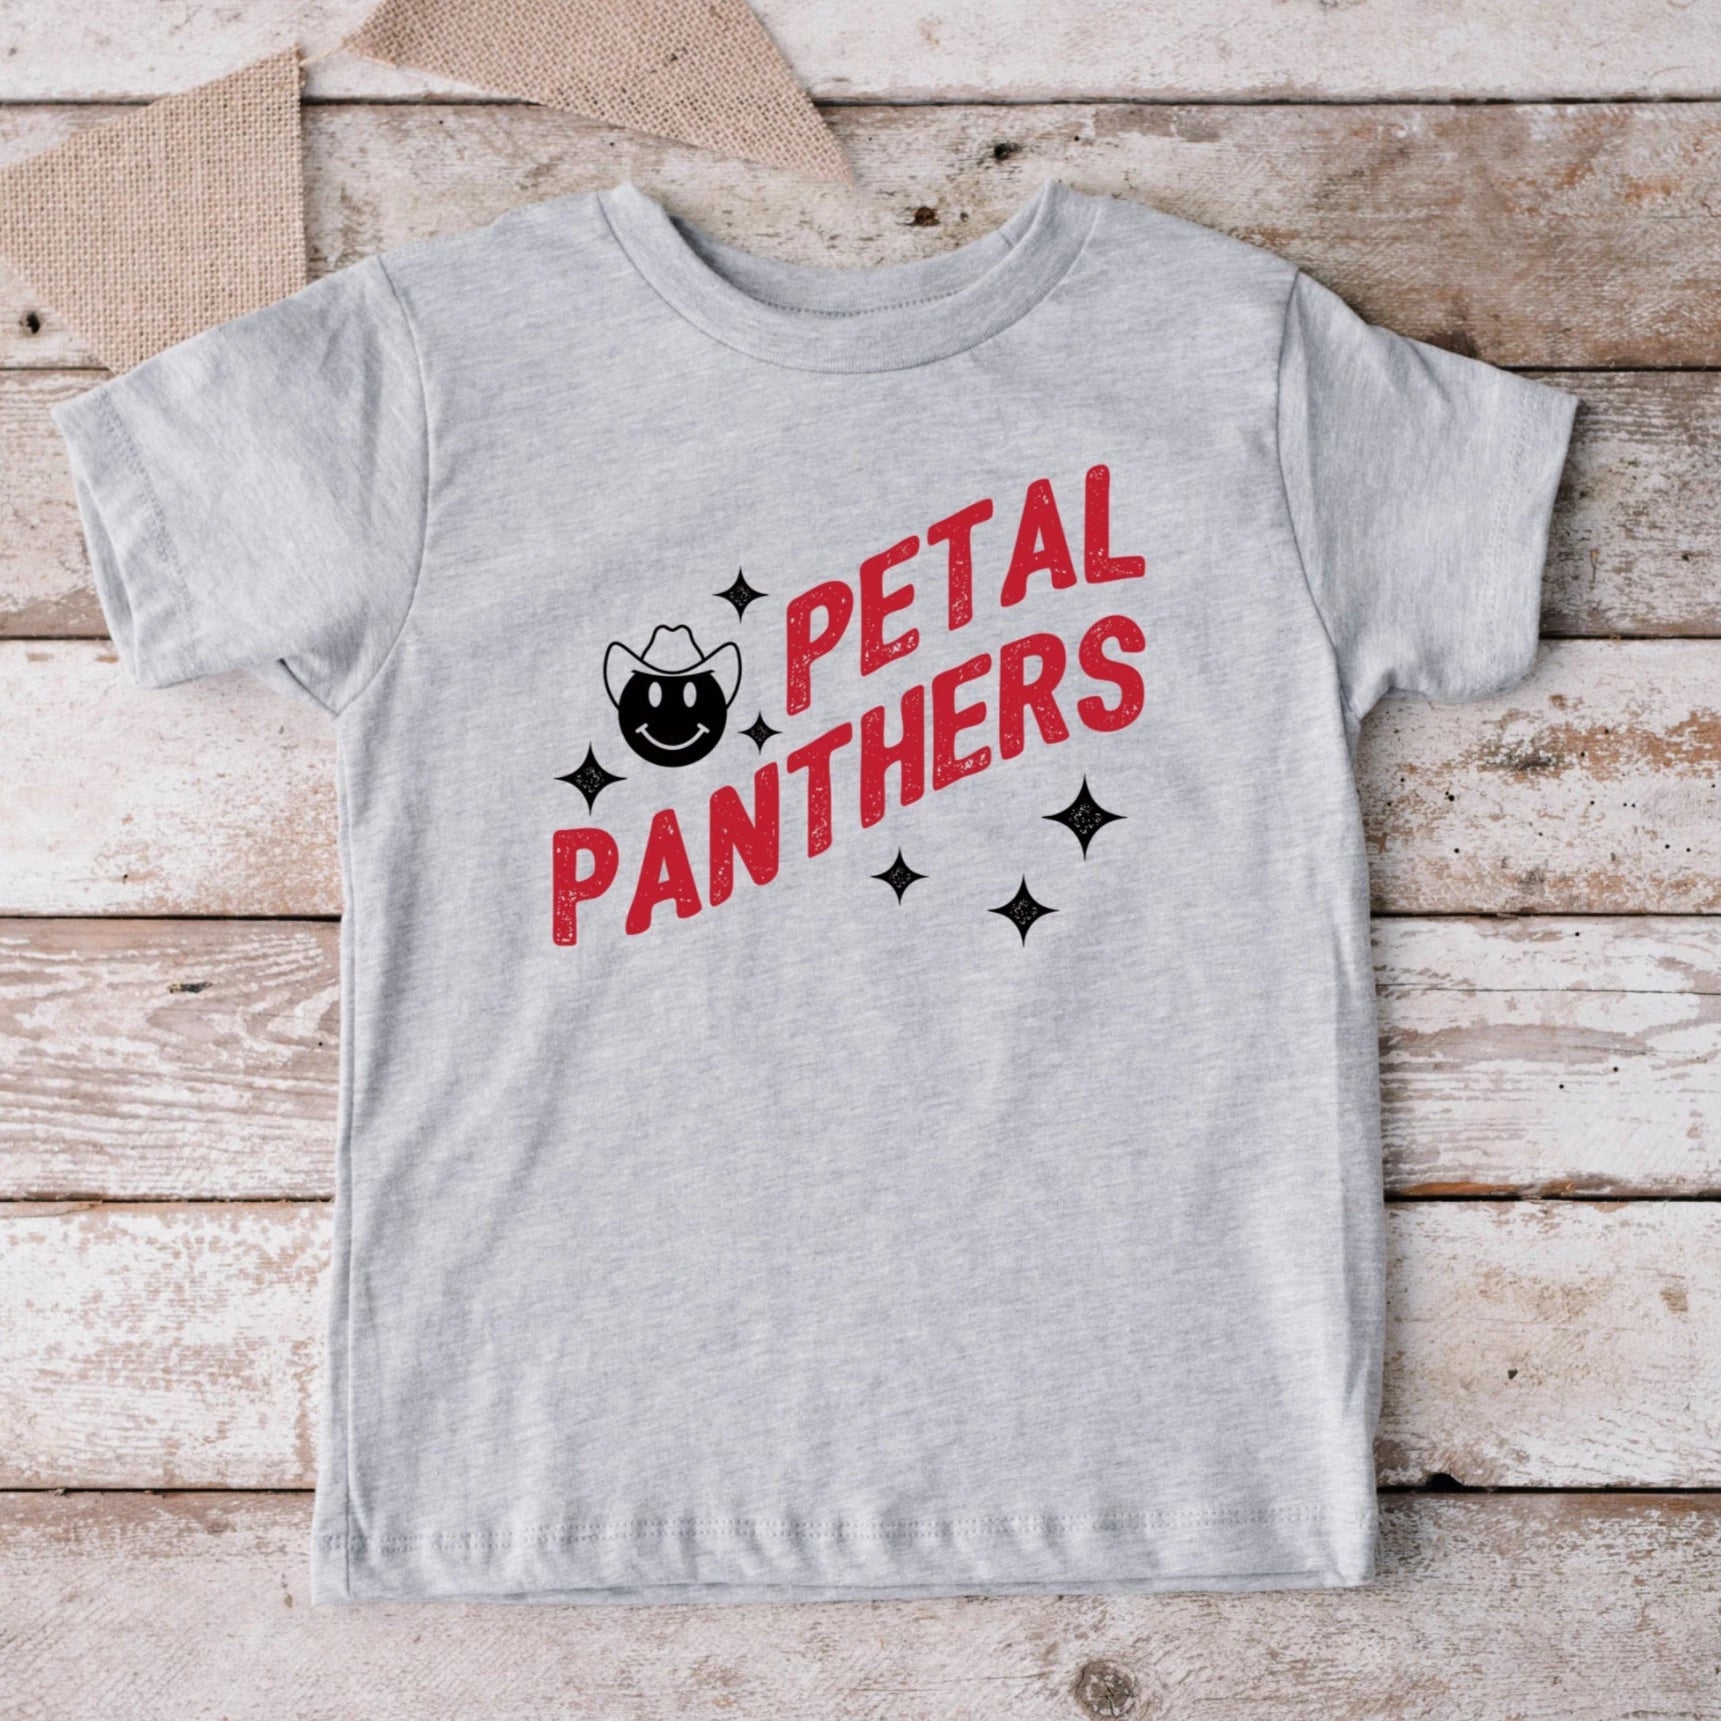 Toddler/Youth Petal Panthers Cowgirl Tee